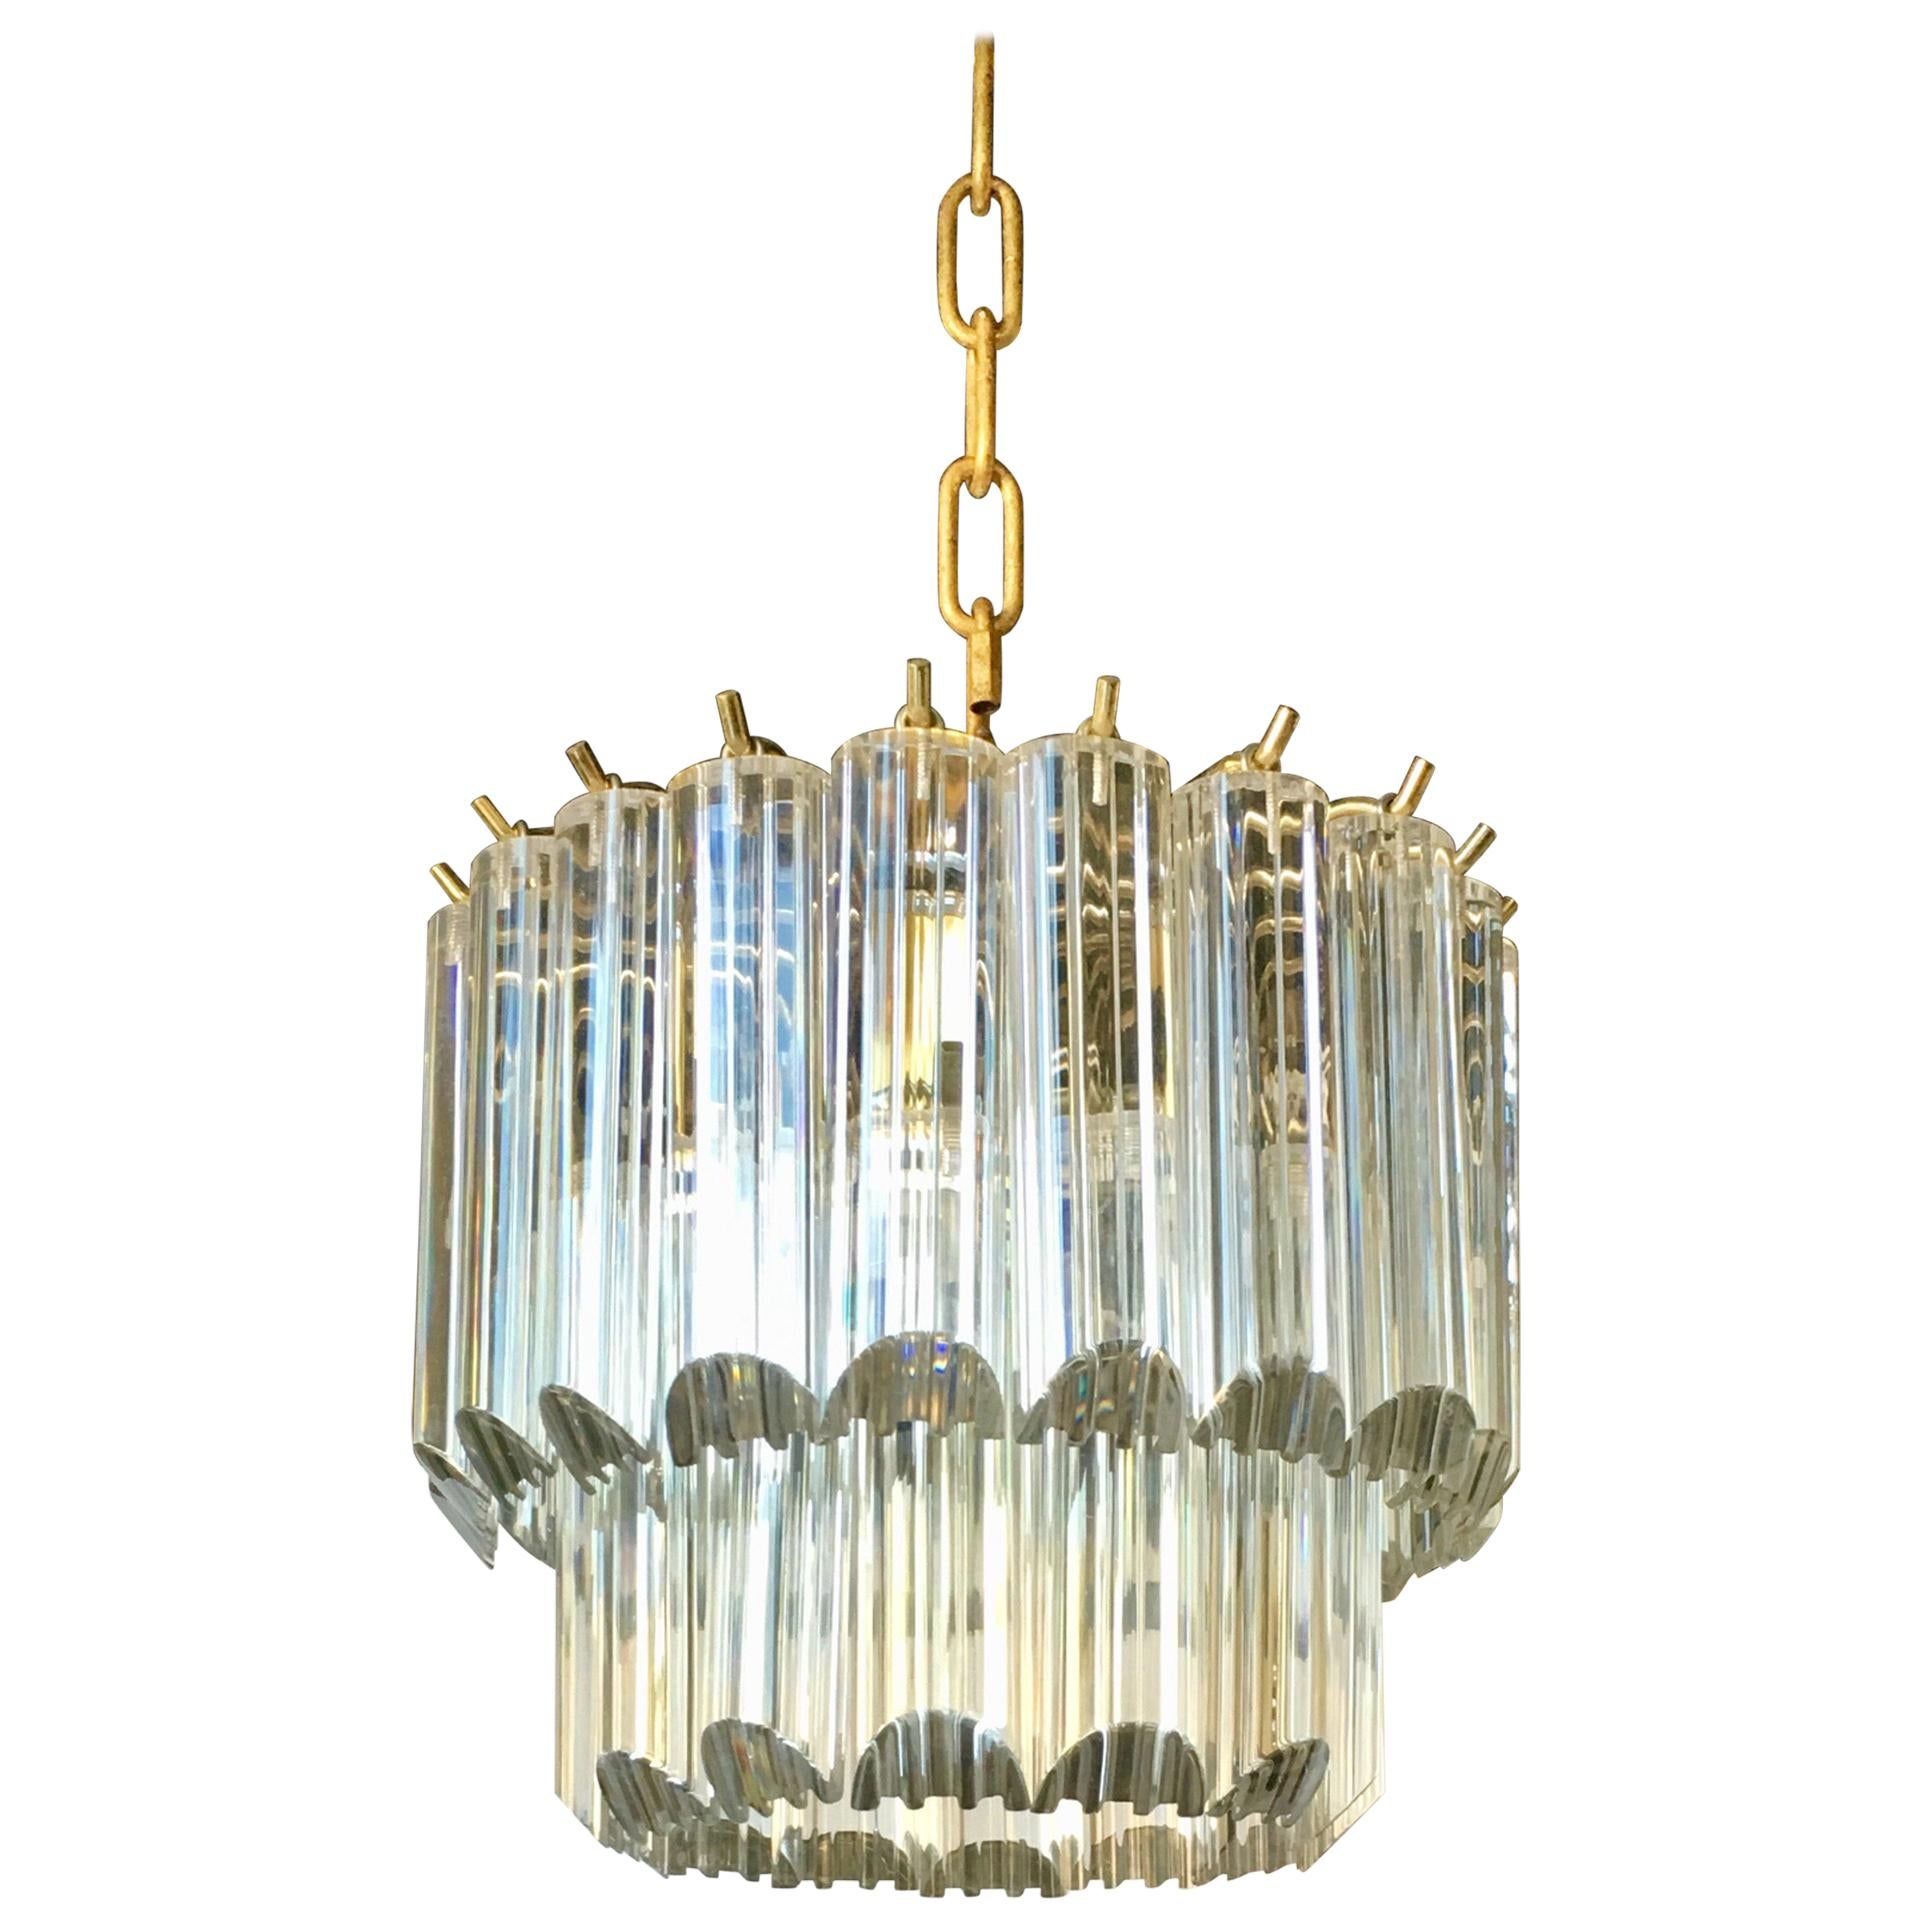 Mid-Century Modern Tiered Lucite Waterfall Chandelier Light Fixture, Italy